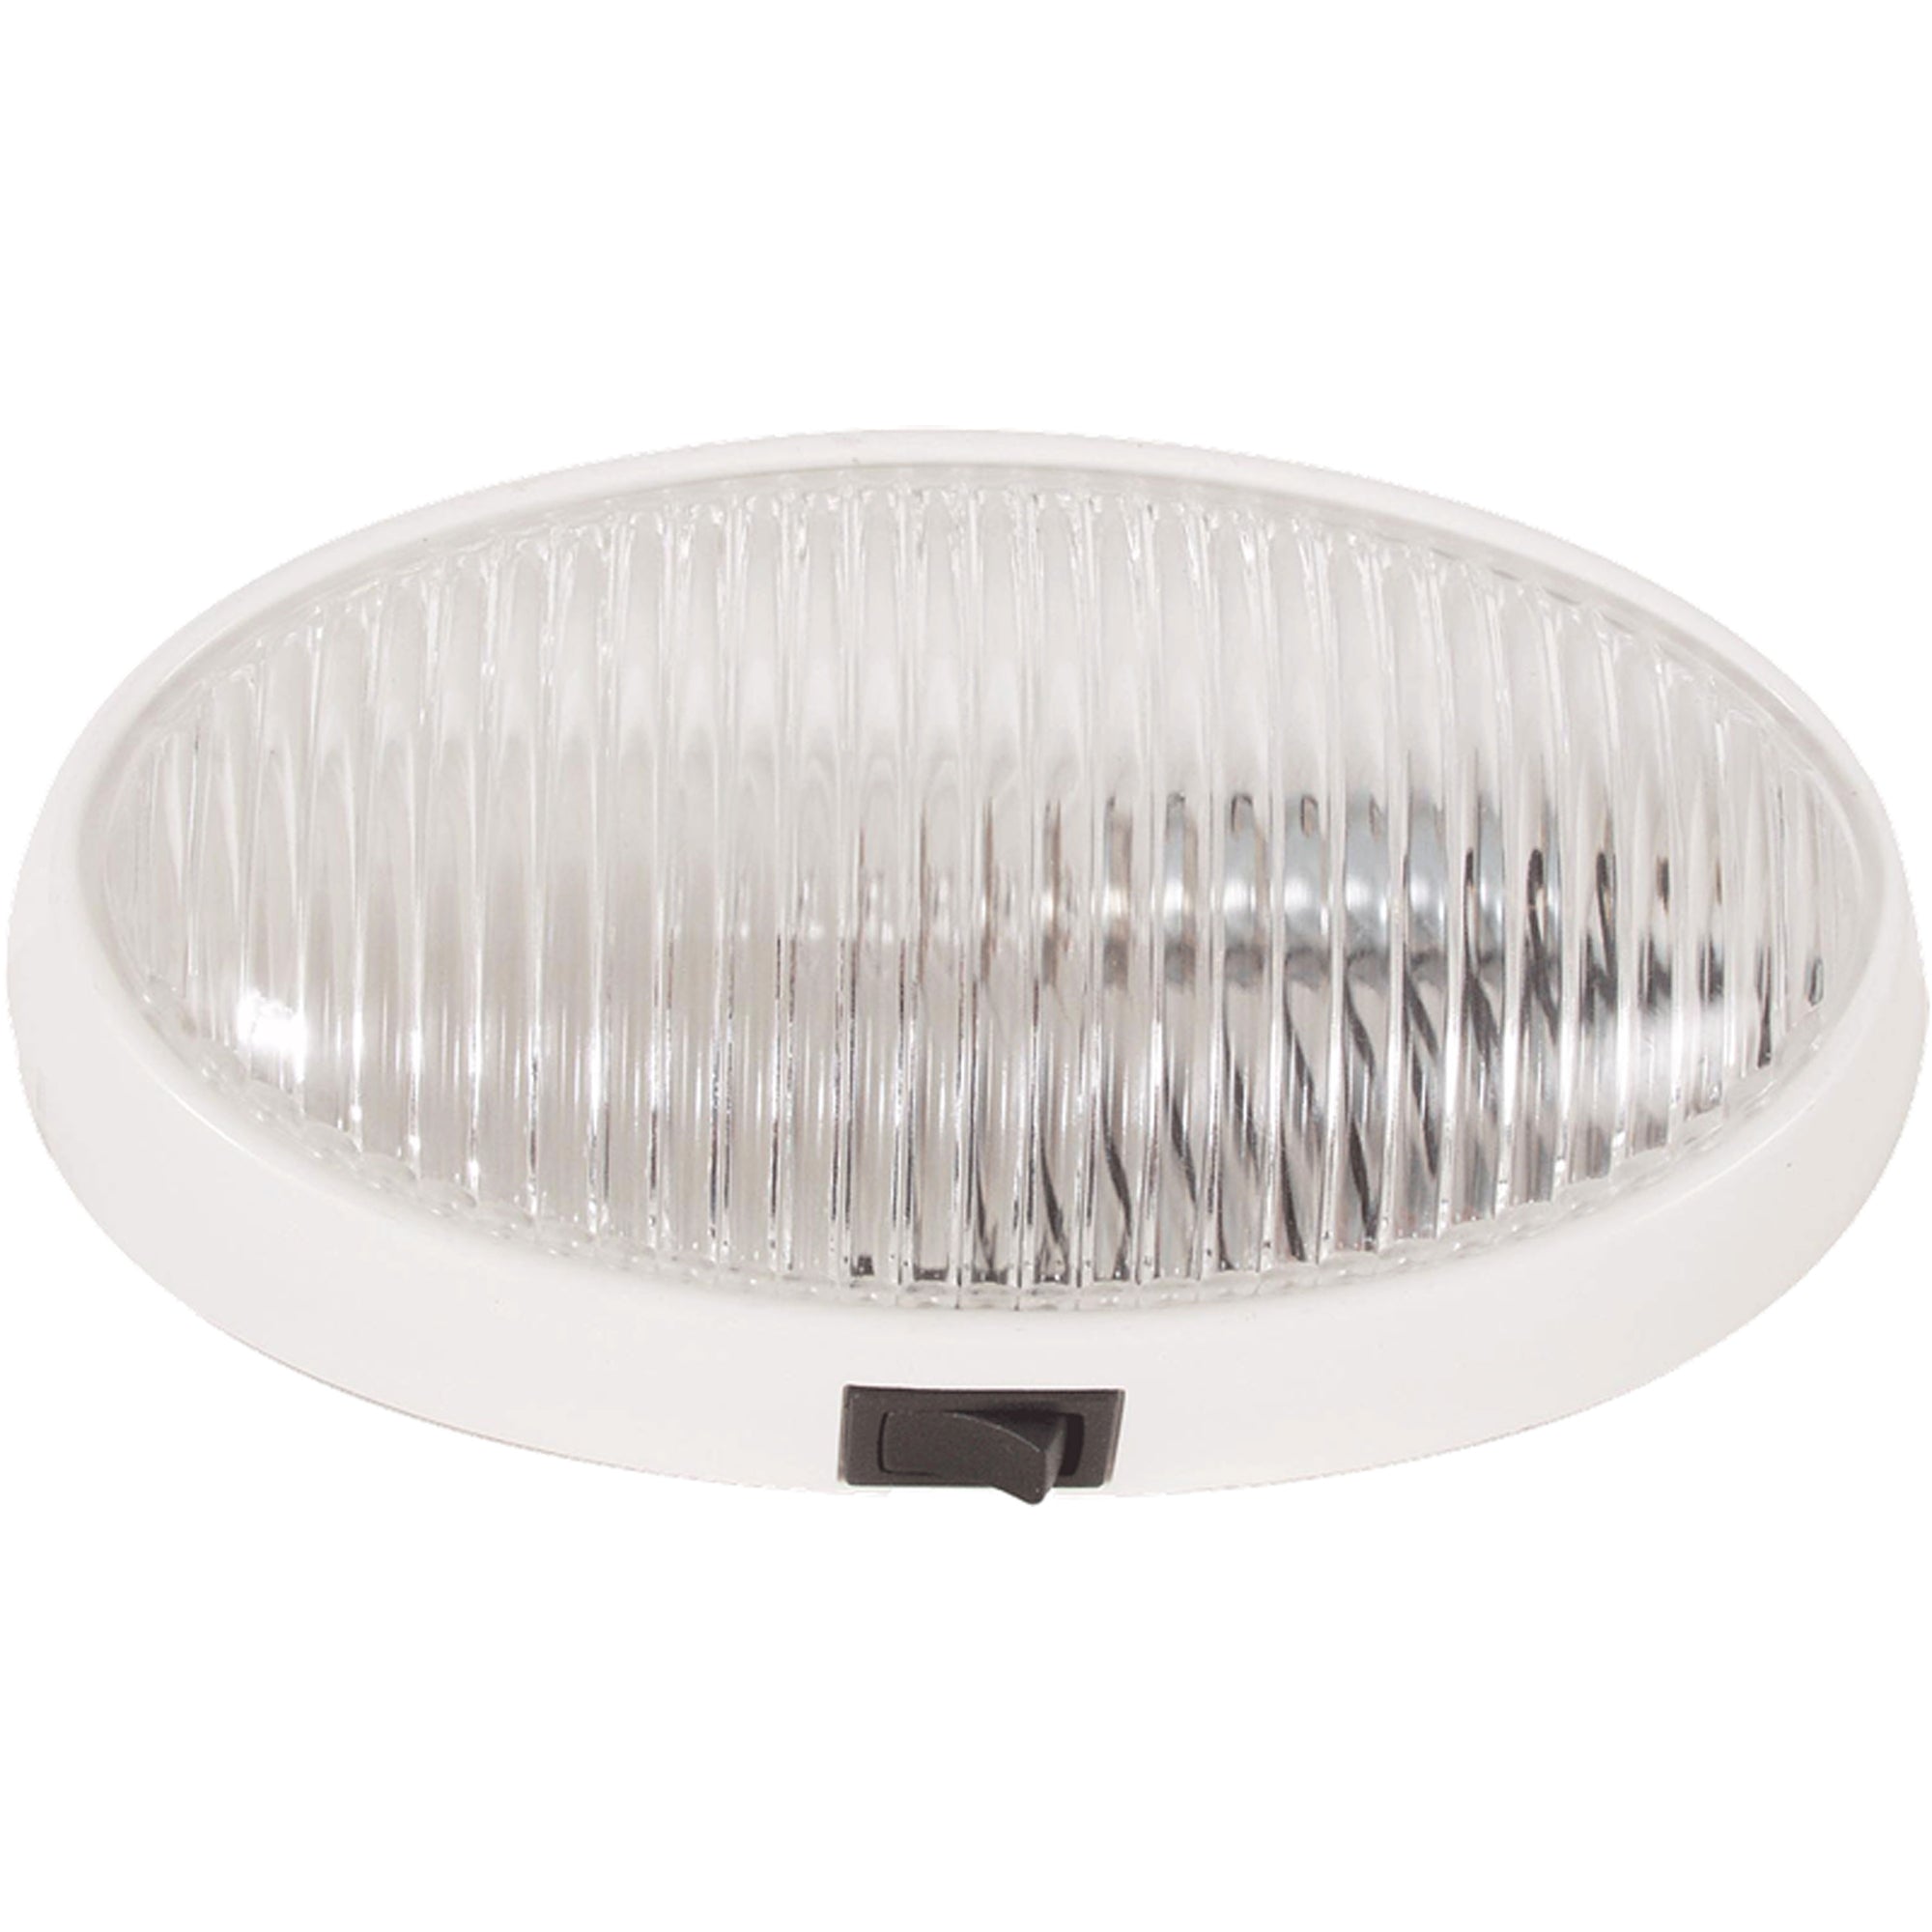 Optronics RVPL7CFS Surface Mount Porchlight - Clear Oval, White Housing